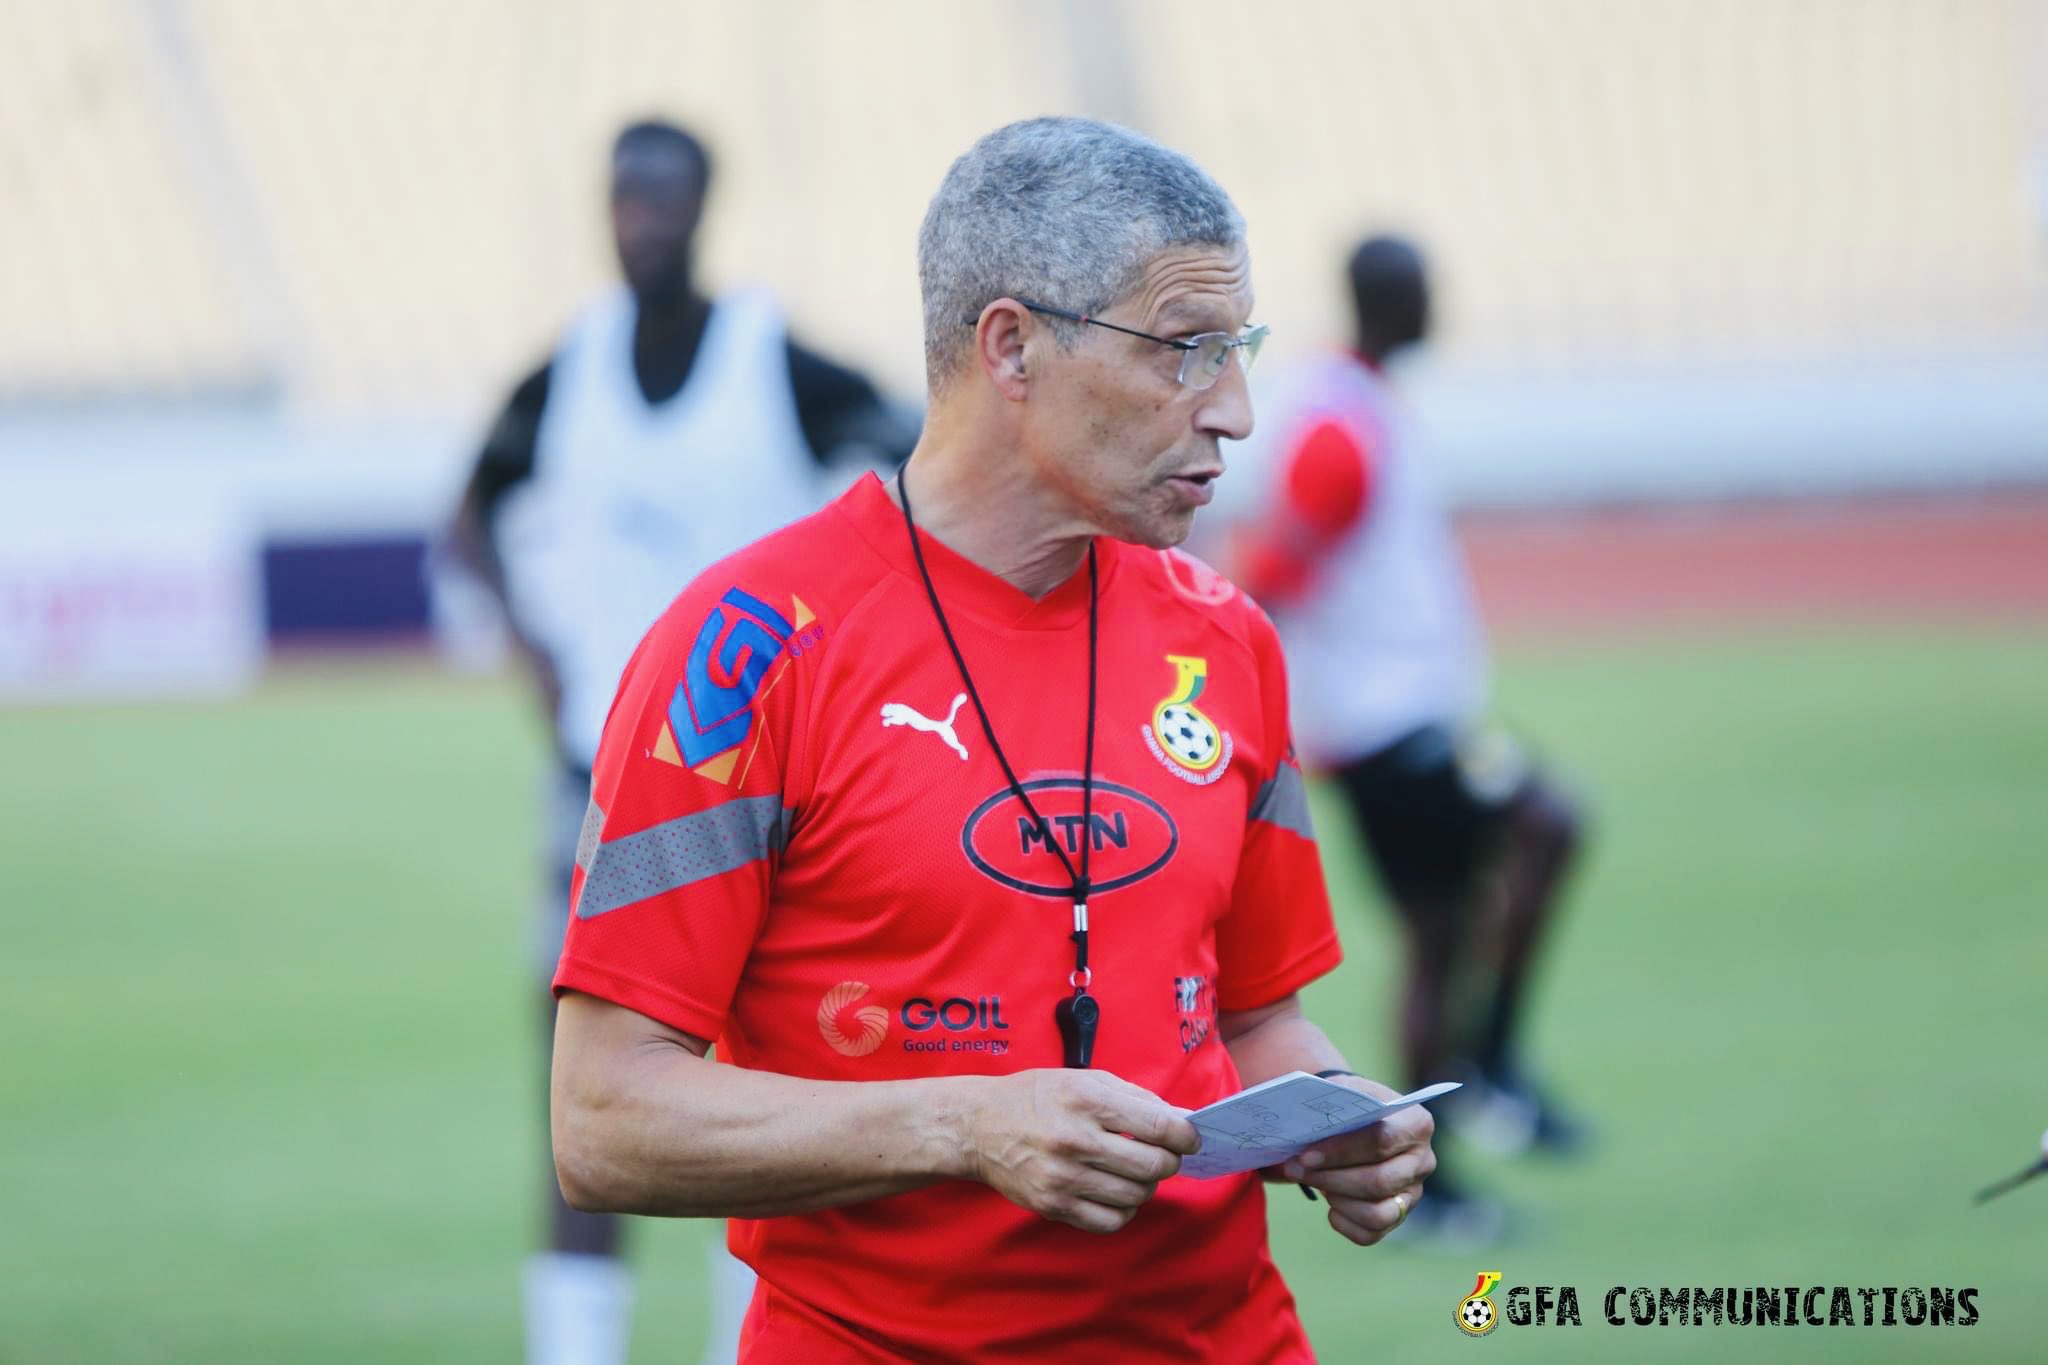 Chris Hughton names squad for Africa Cup of Nations qualifier against Madagascar